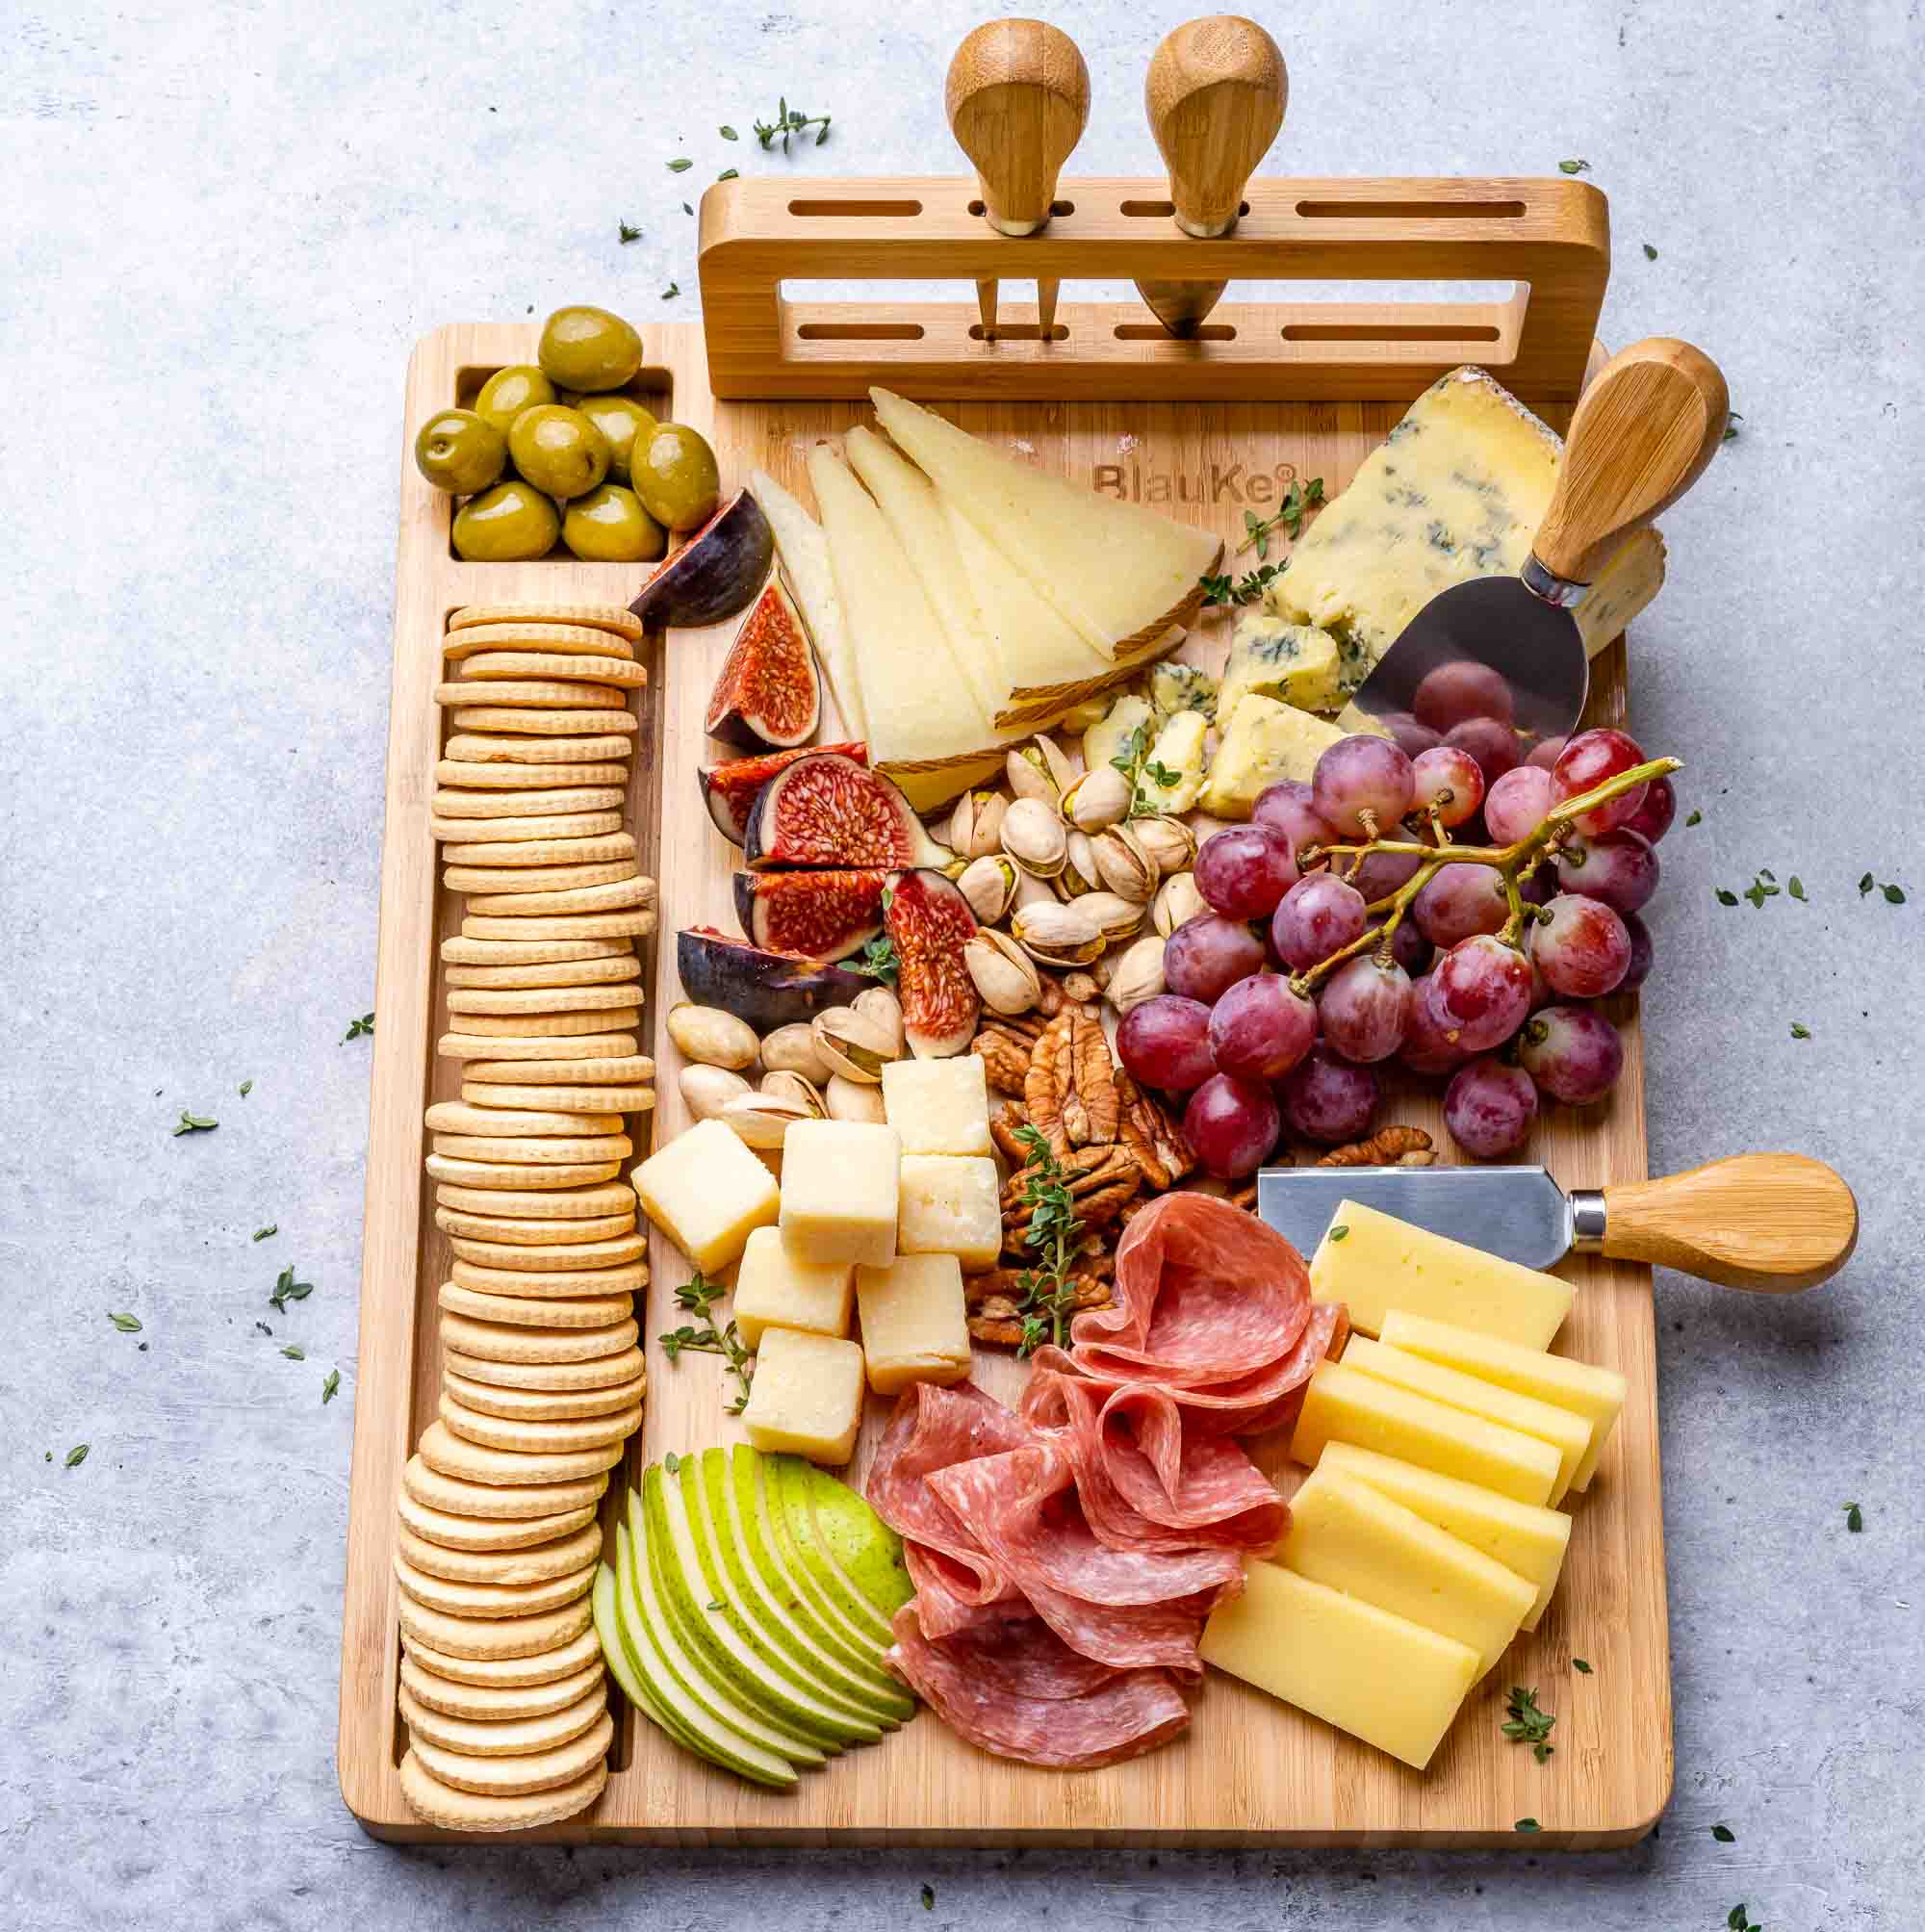 Bamboo Cheese Board and Knife Set - 14x11 inch Charcuterie Board with 4 Cheese Knives - Wood Serving Tray